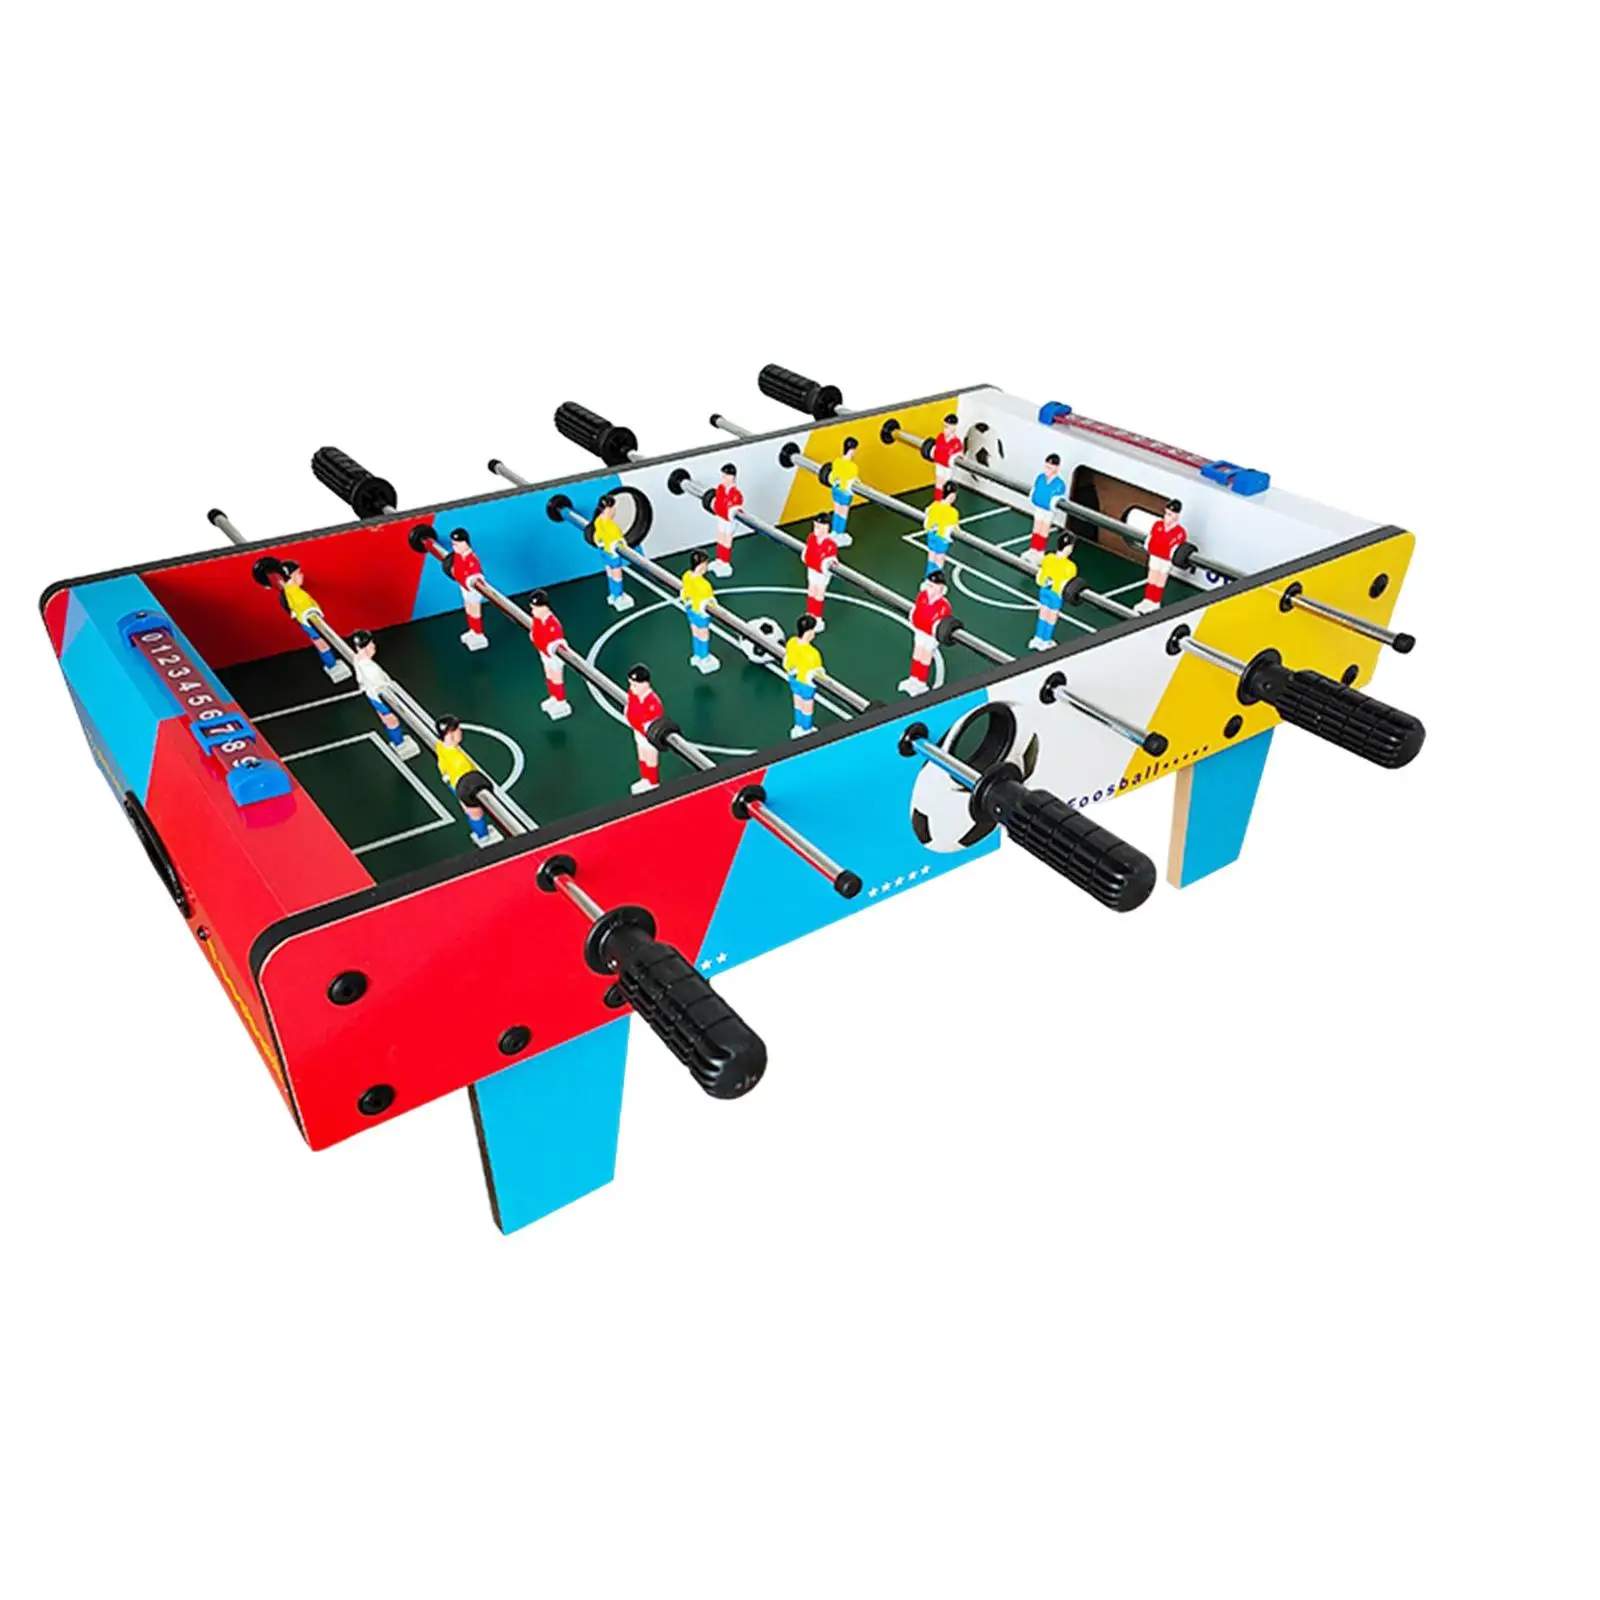 Foosball Table Early Educational Toy Motor Skills DIY Table Top Football Game for Birthday Gifts Party Game Children Kids Adults